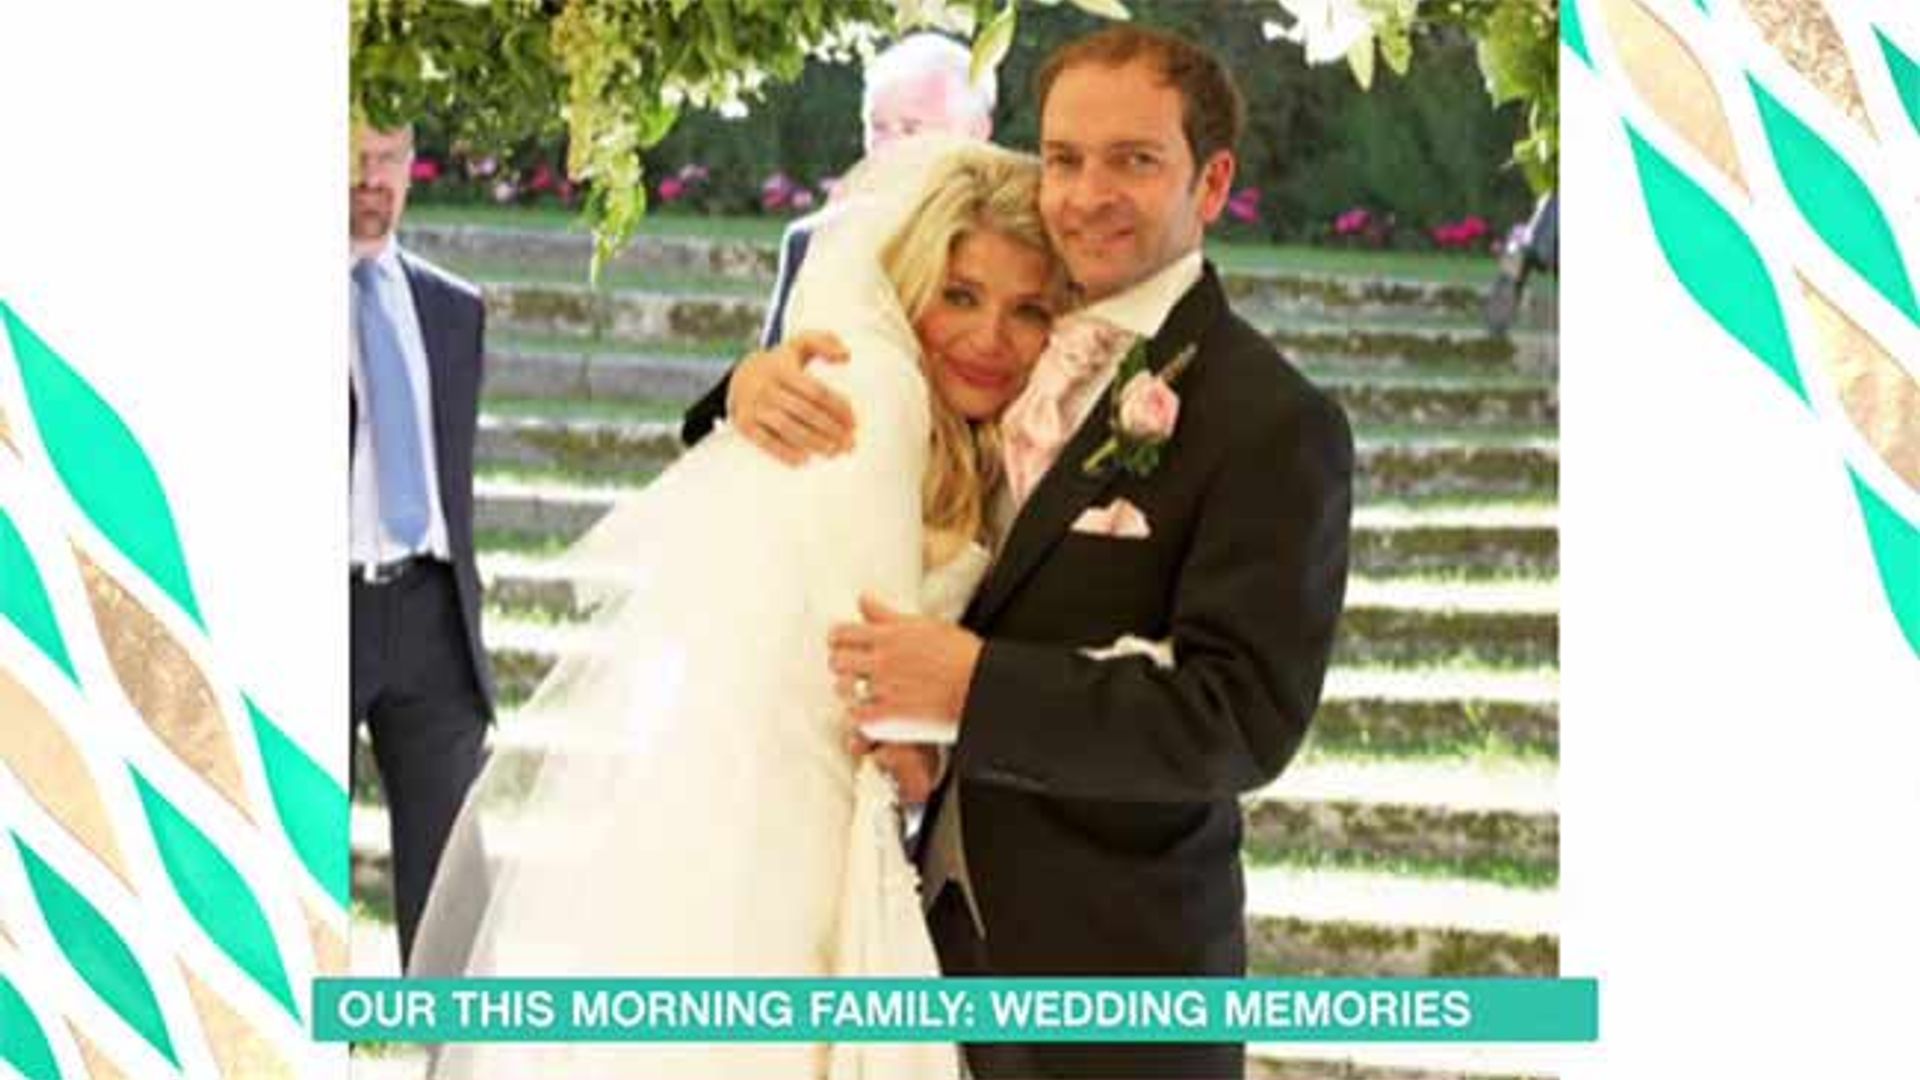 Holly Willoughby crying as she leans against husband Dan on their wedding day